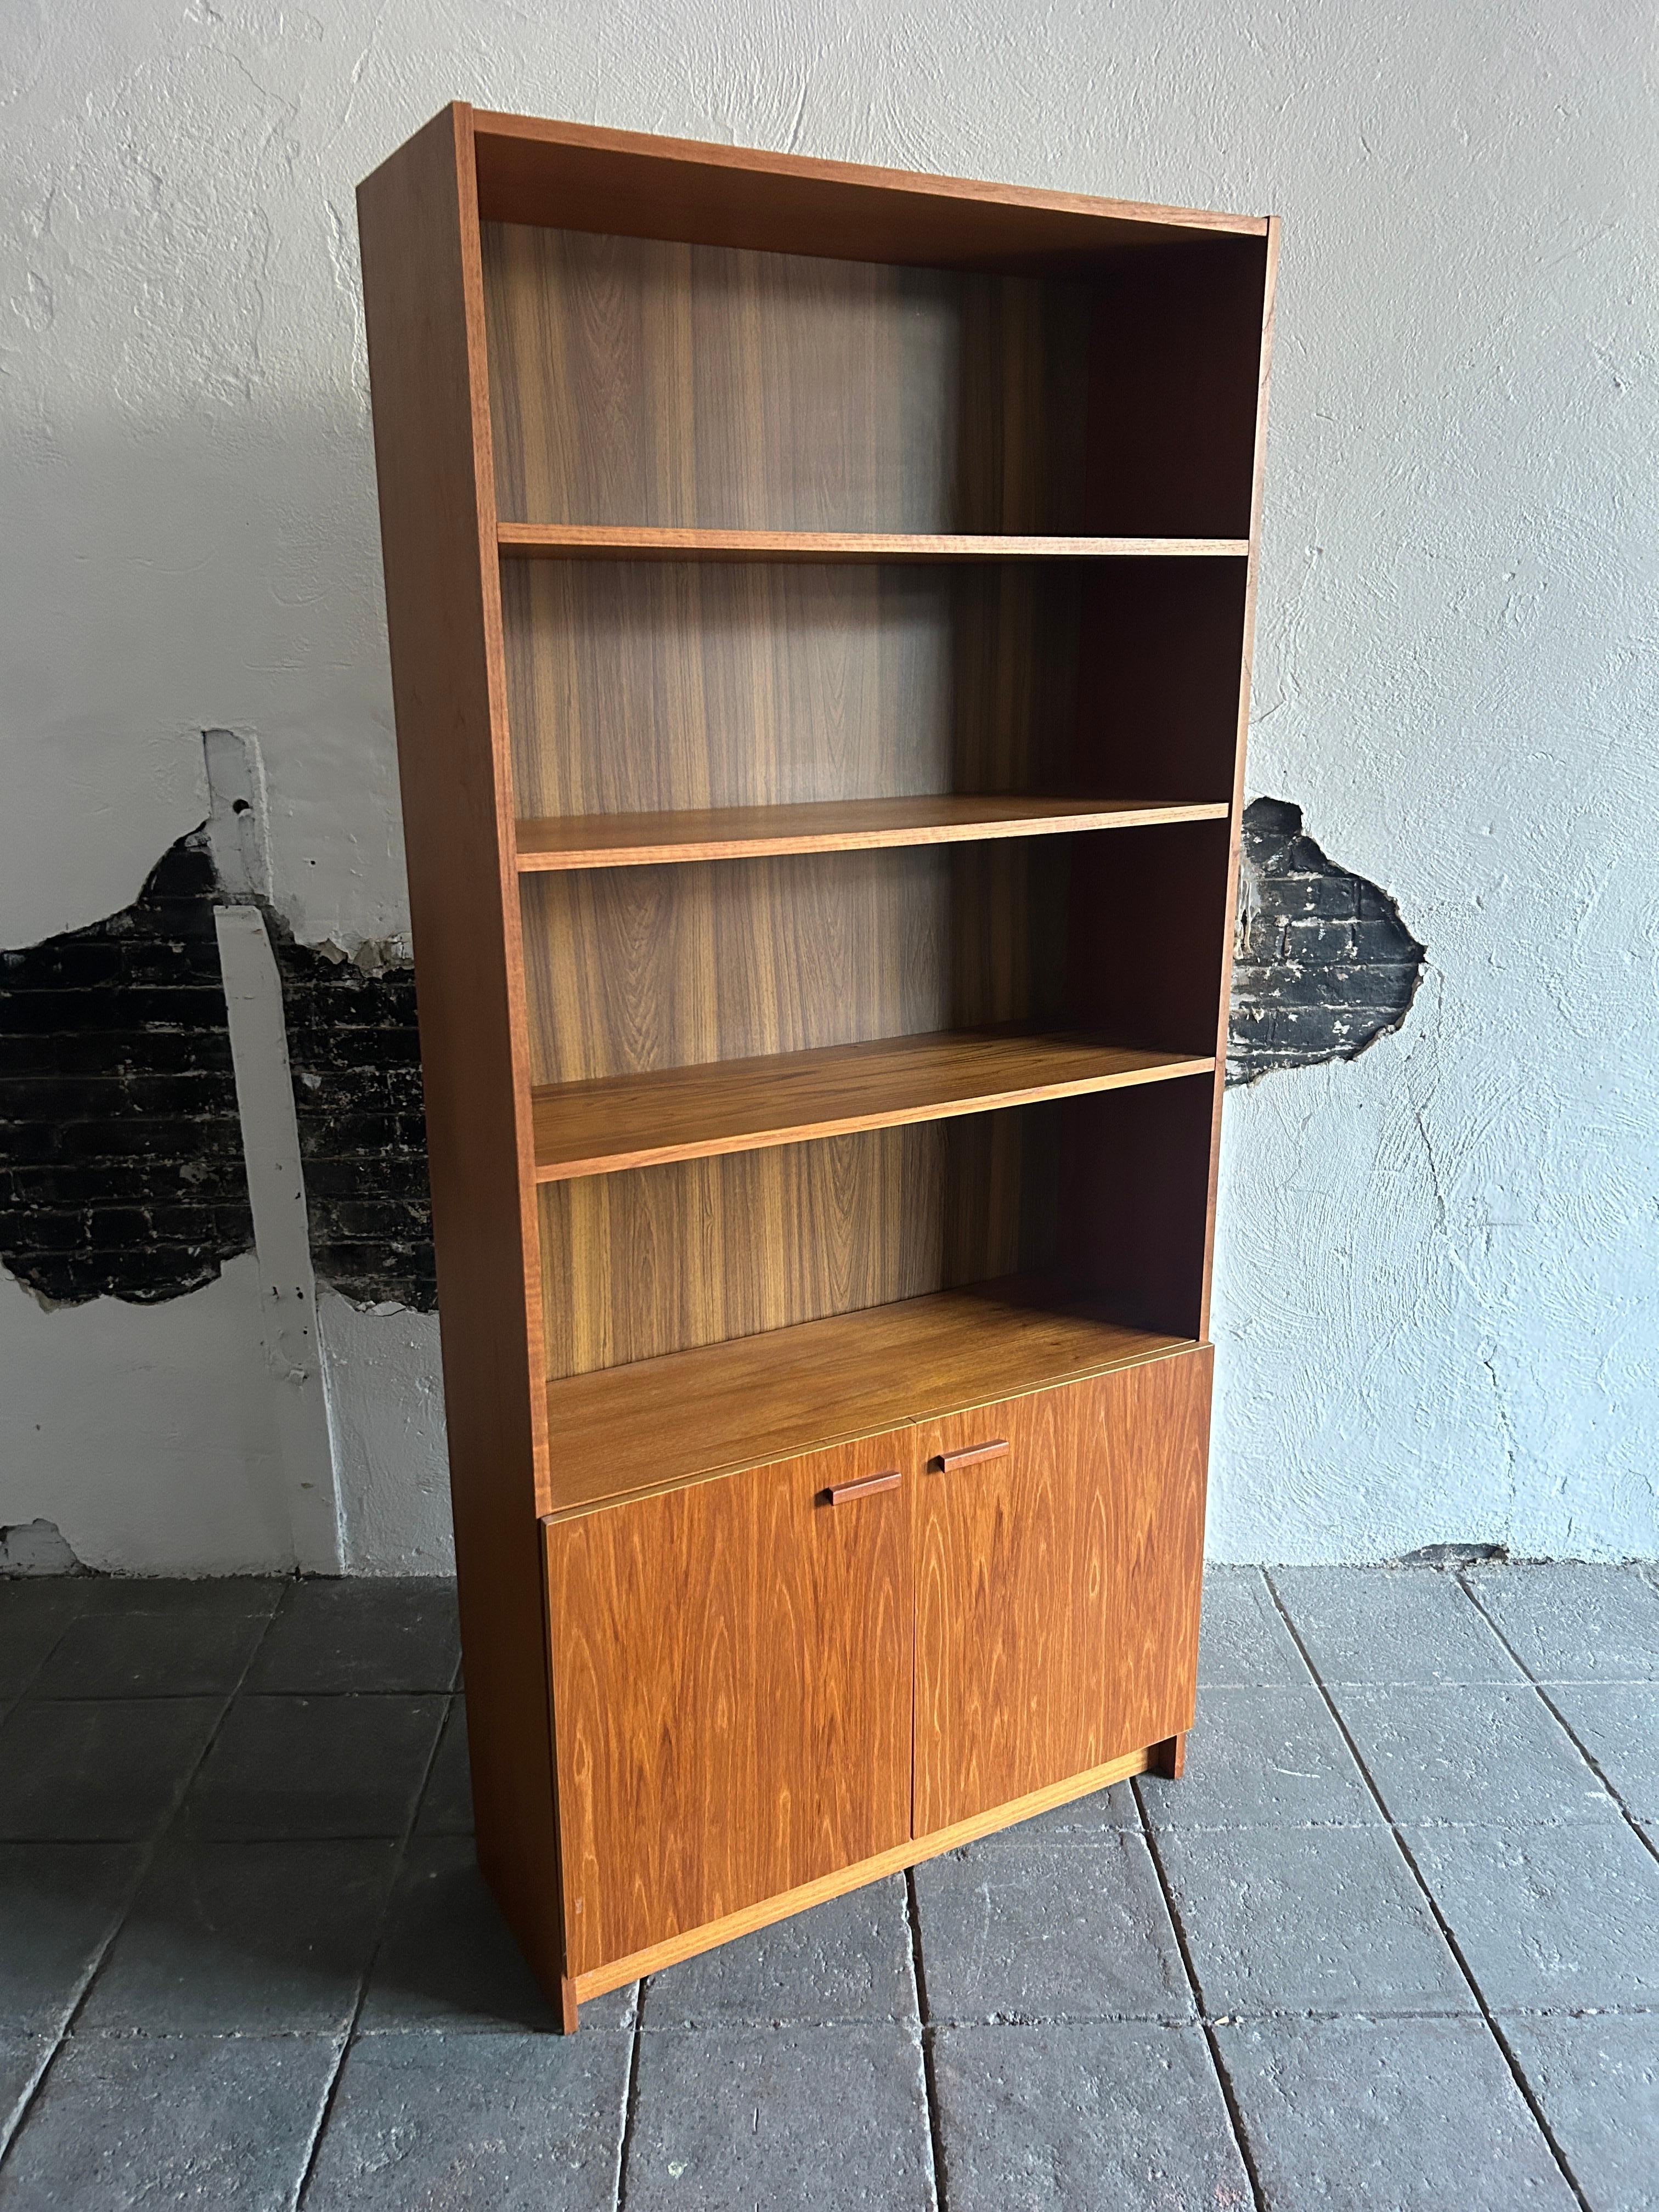 Stunning Mid-Century Modern wide teak tall bookcase with (2) cabinet doors Made in Denmark. This bookcase is completely original and in very good vintage condition. The bookcase has (2) adjustable shelves with (5) shelves total and lower cabinet